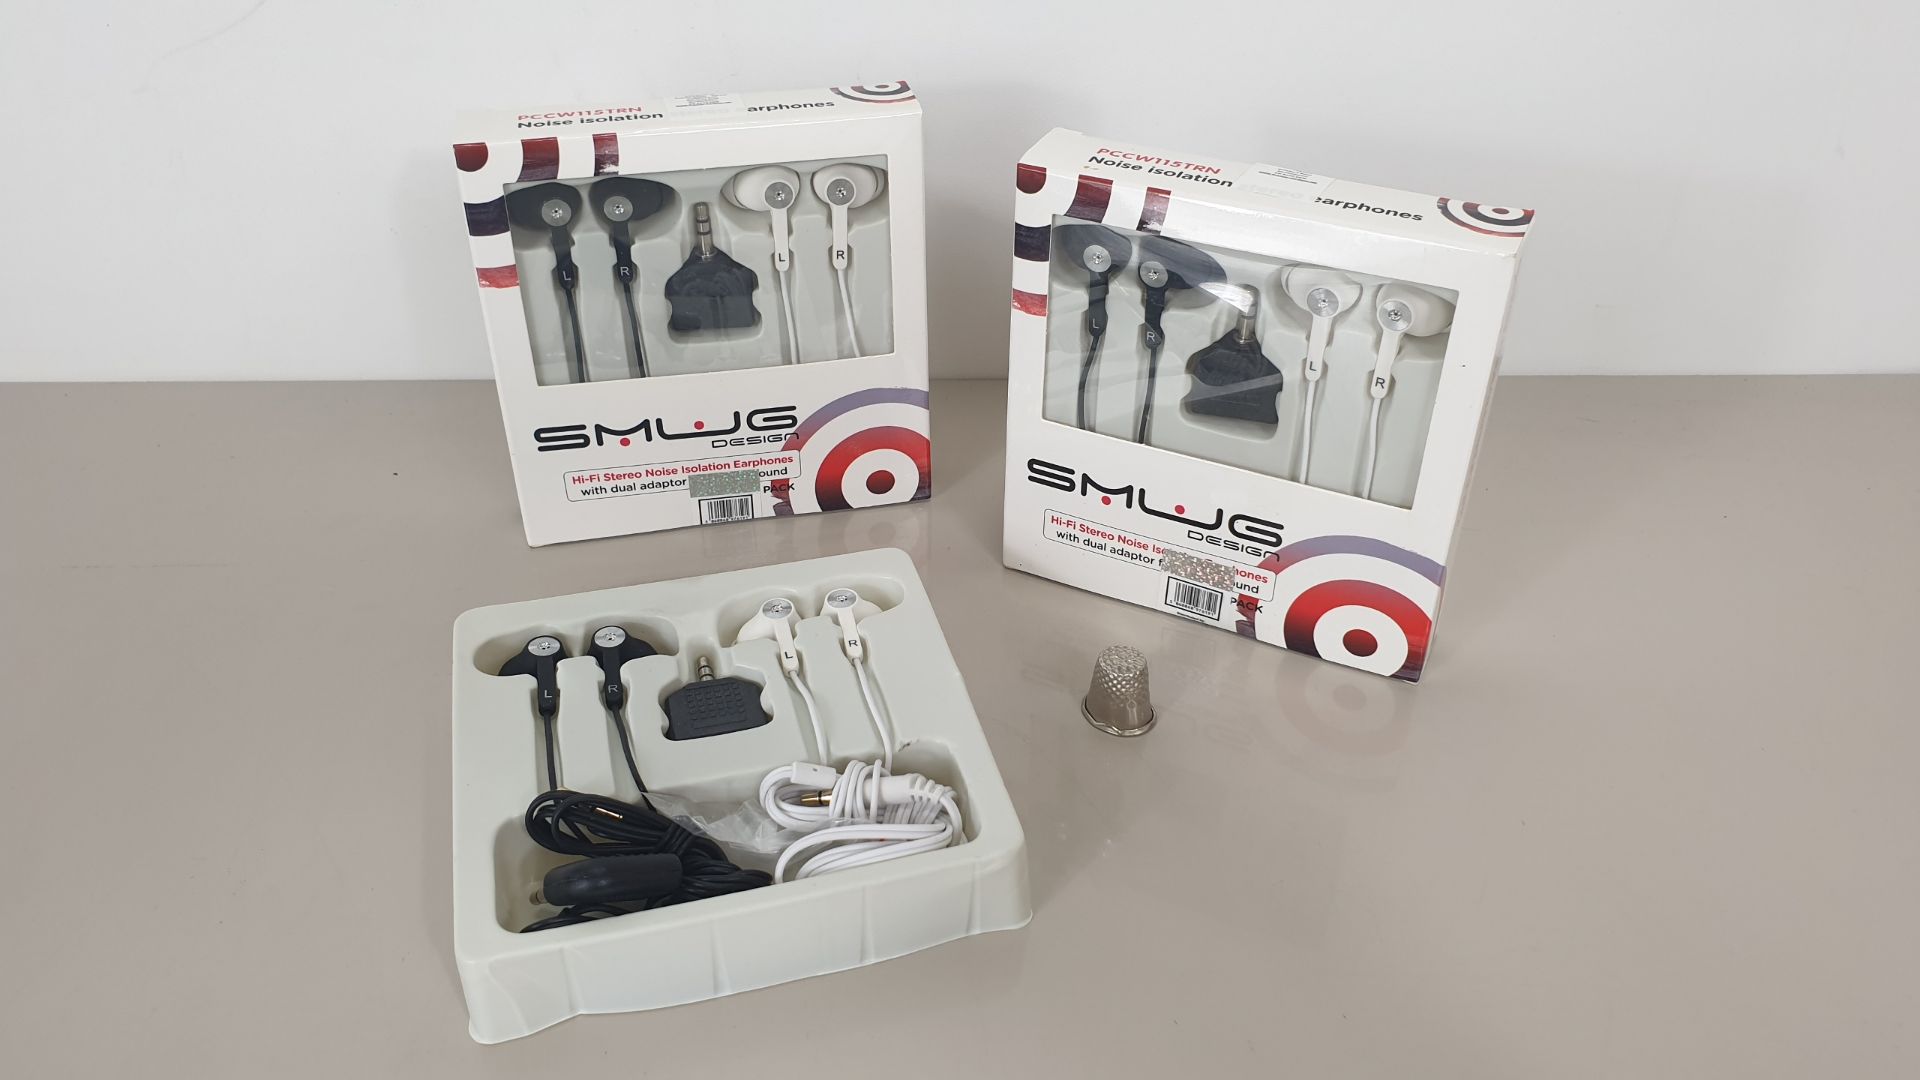 100 X SMUG DESIGN TWIN PACK HI-FI NOISE ISOLATION EARPHONES WITH DUAL AIRLINE ADAPTOR IN A DISPLAY